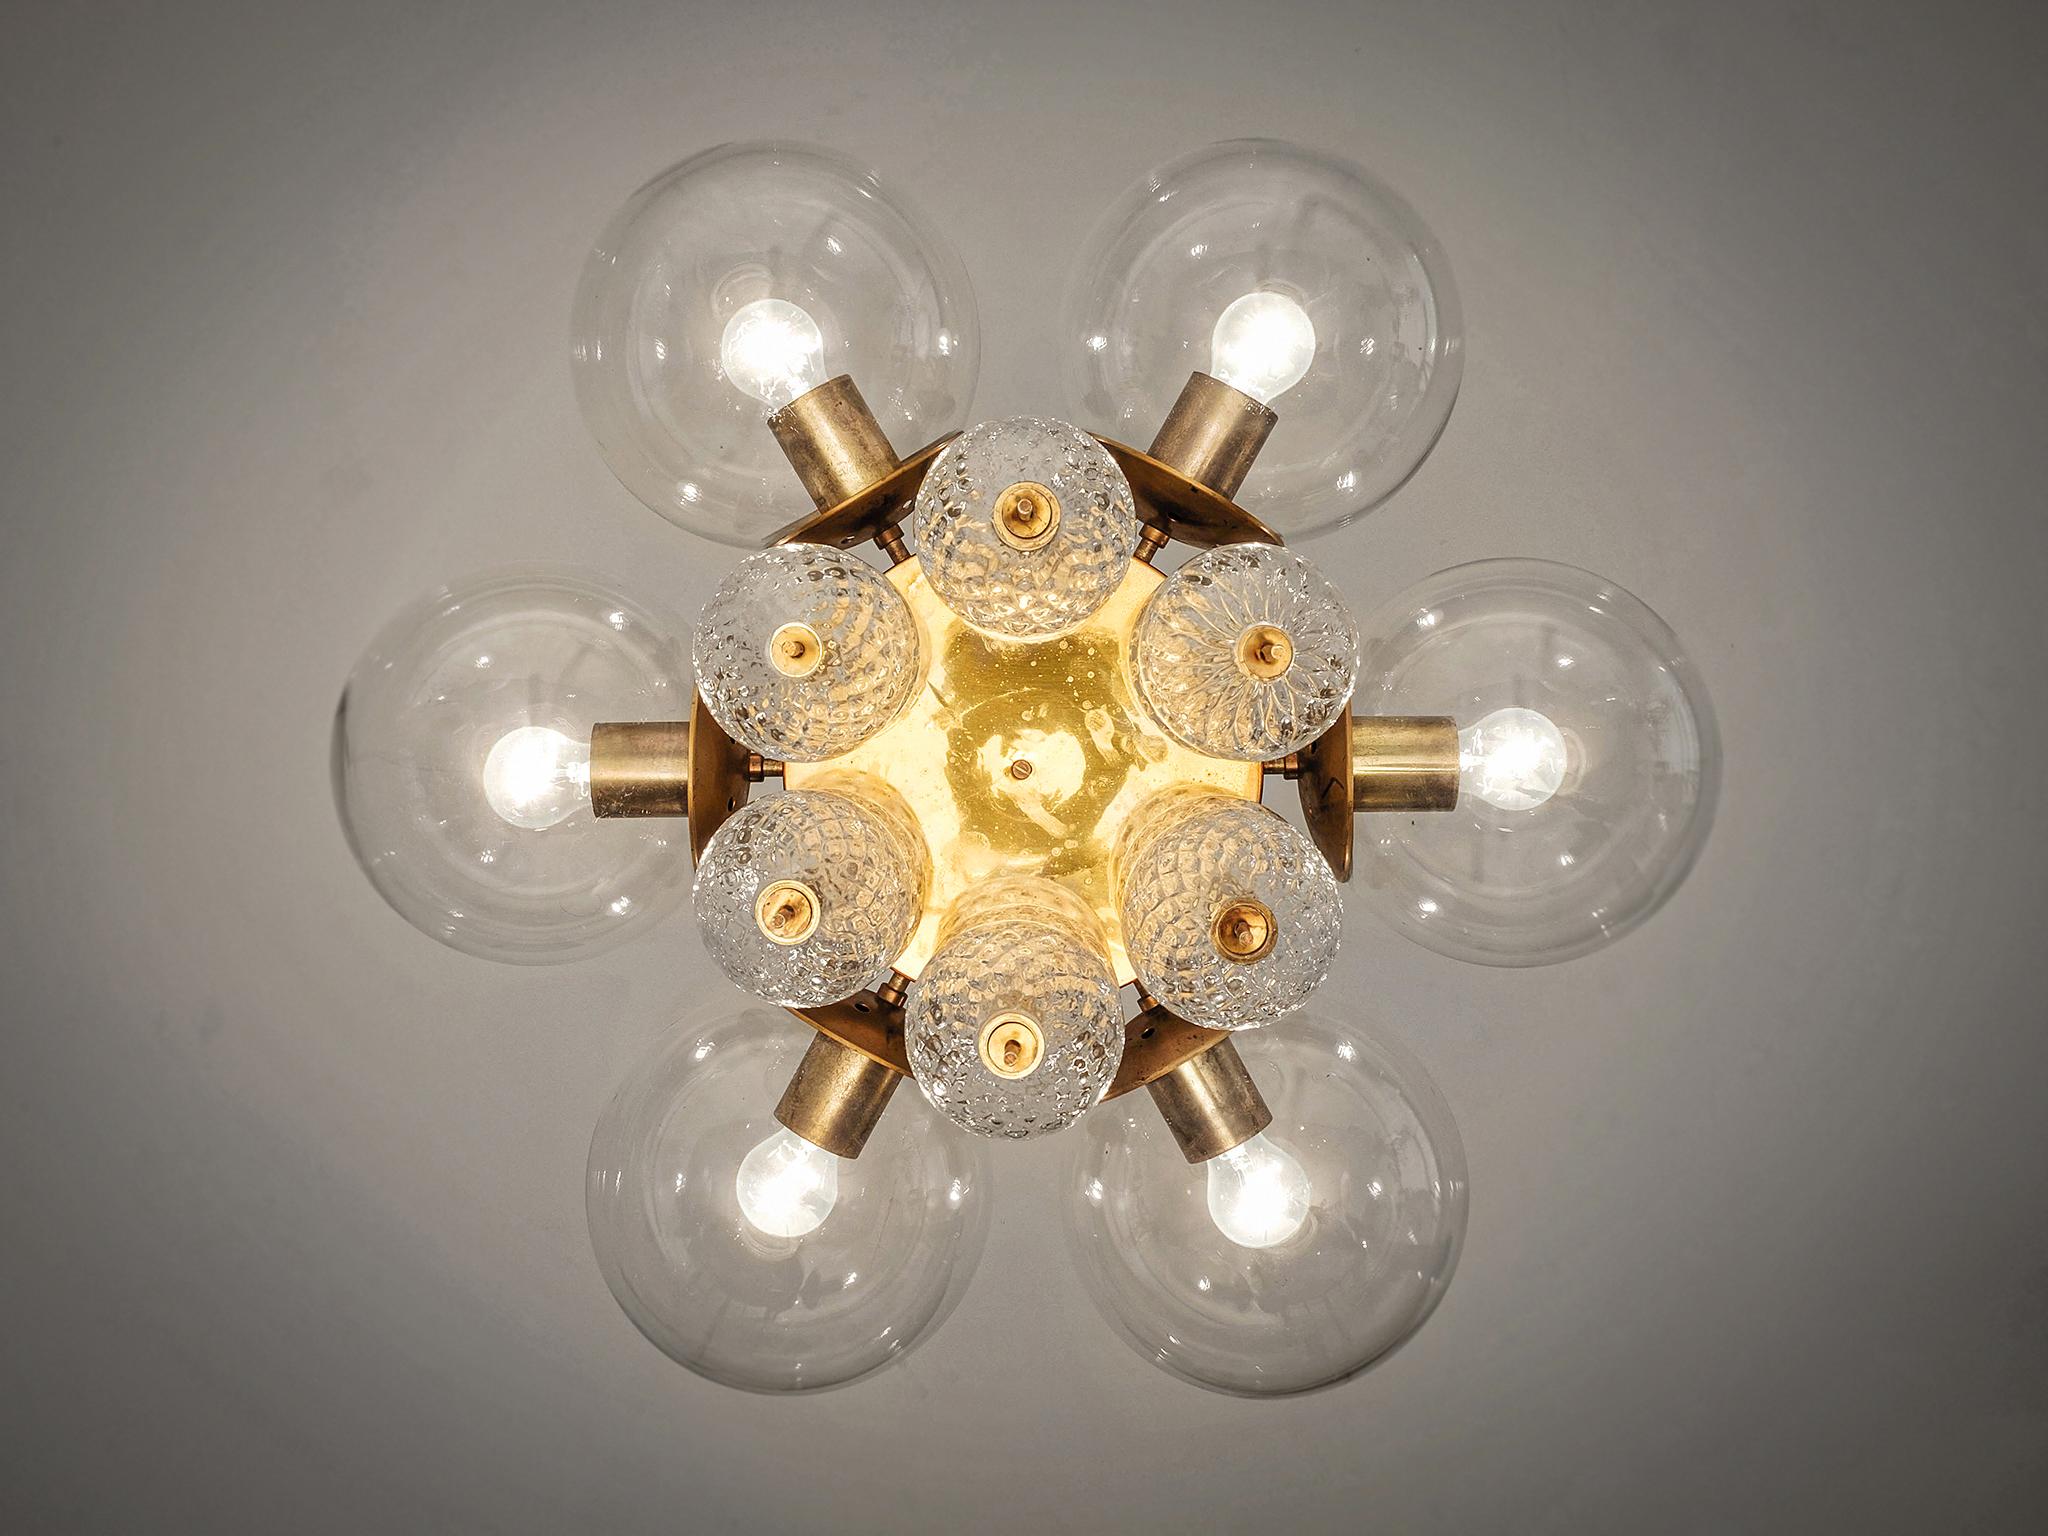 Chandelier, brass, glass, Europe, 1960s.

Elegant chandelier with brass fixture and structured glass decoration. With six light-points, the chandelier creates a nice warm light. The structured glass and brass emphasize to the great light partition